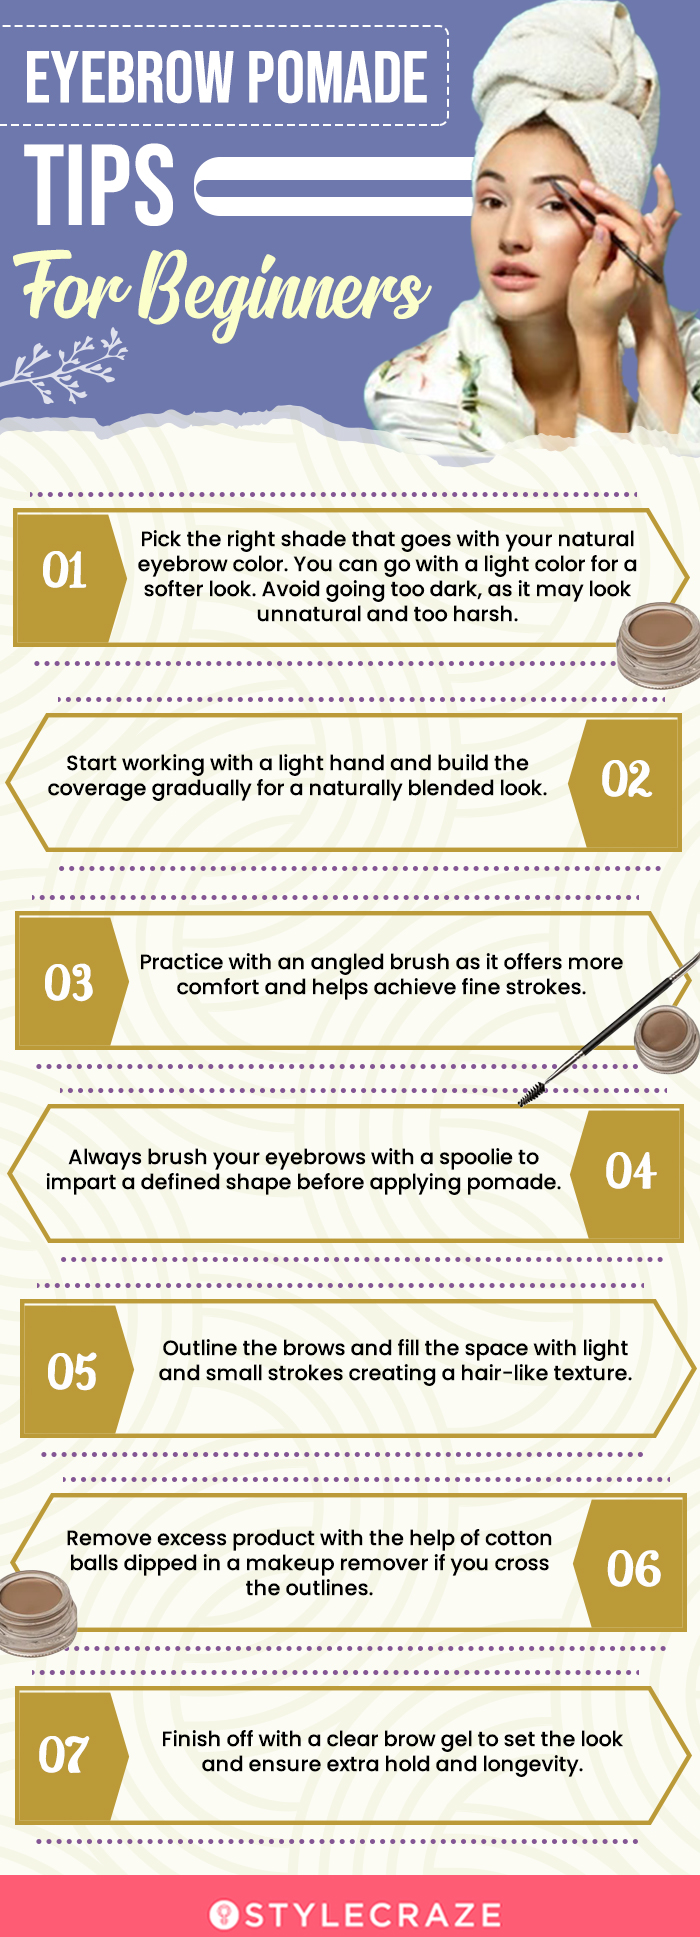 Eyebrow Pomade Tips For Beginners (infographic)